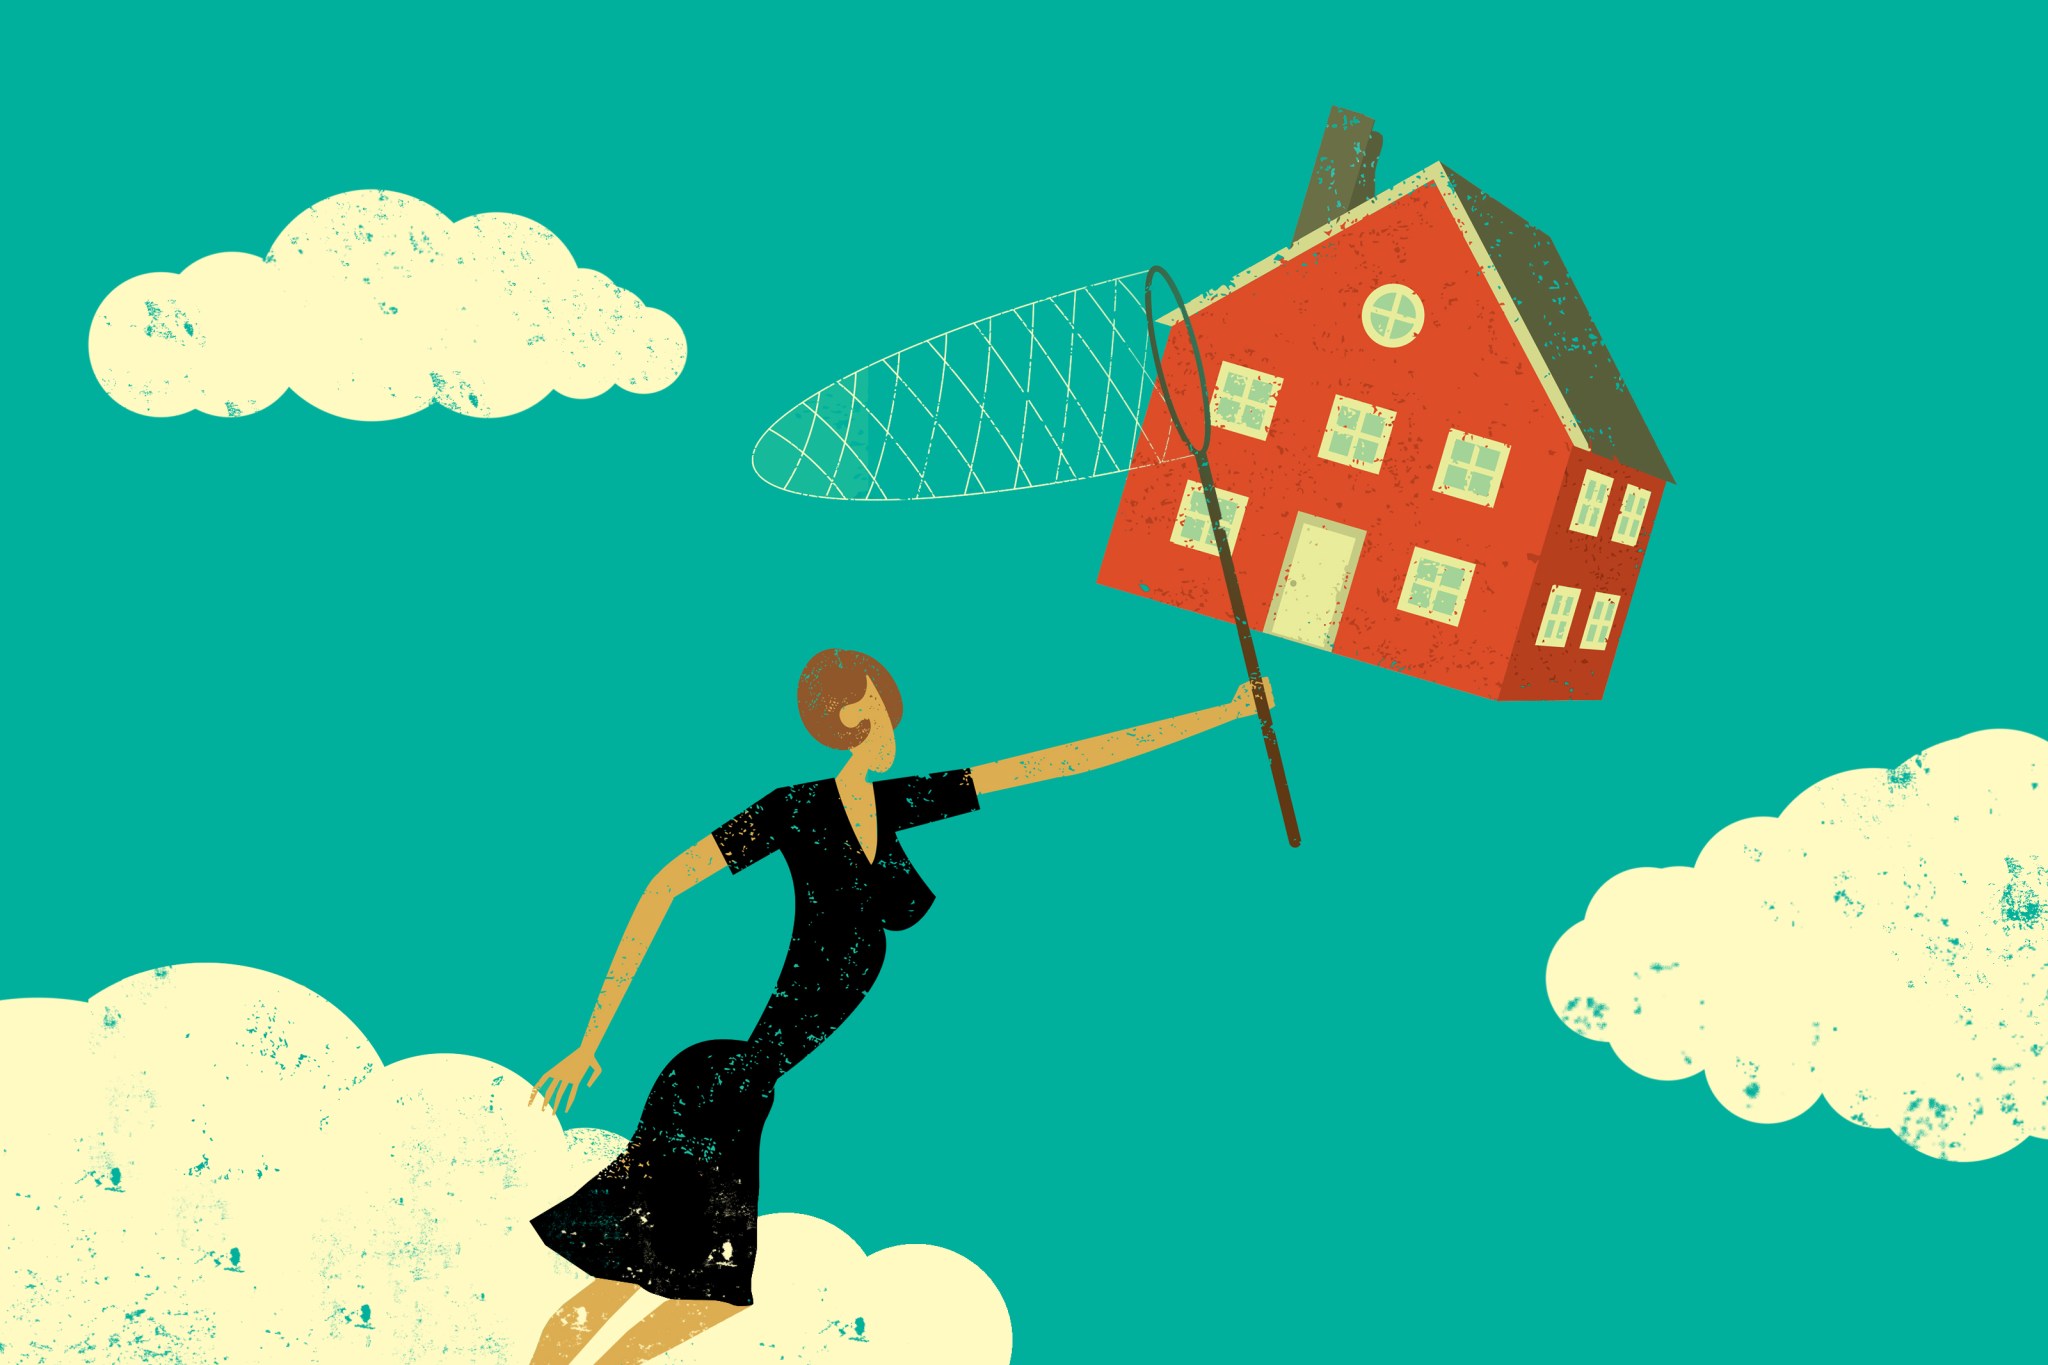 Illustration of woman chasing house with butterfly catcher